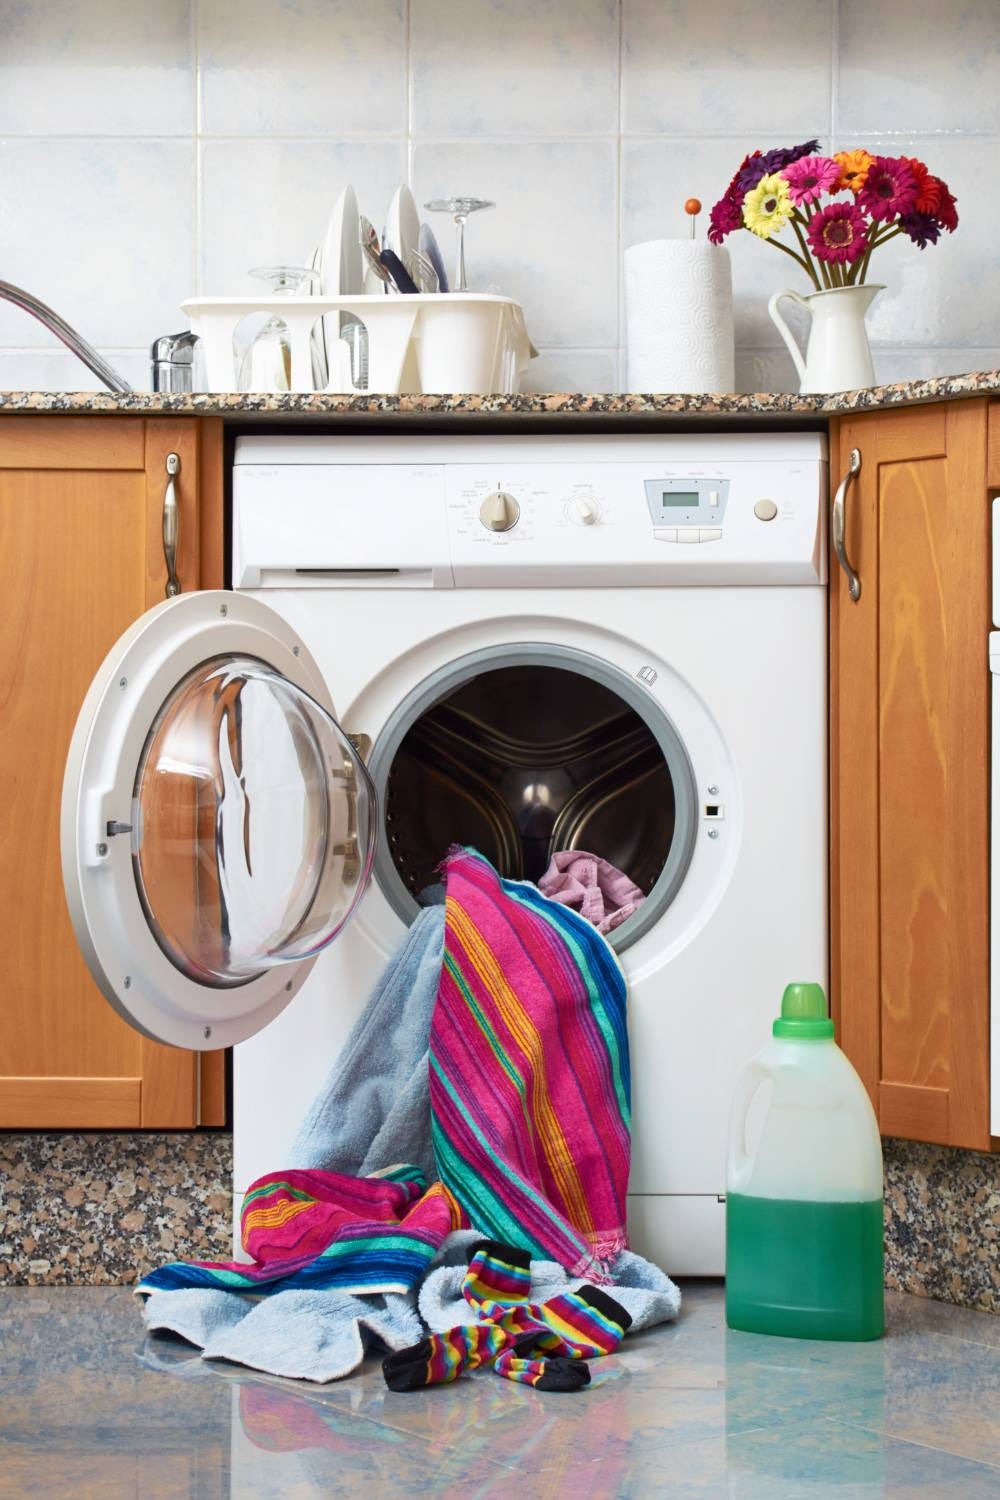 How to Use Portable Washer And Dryer, by House Arctic